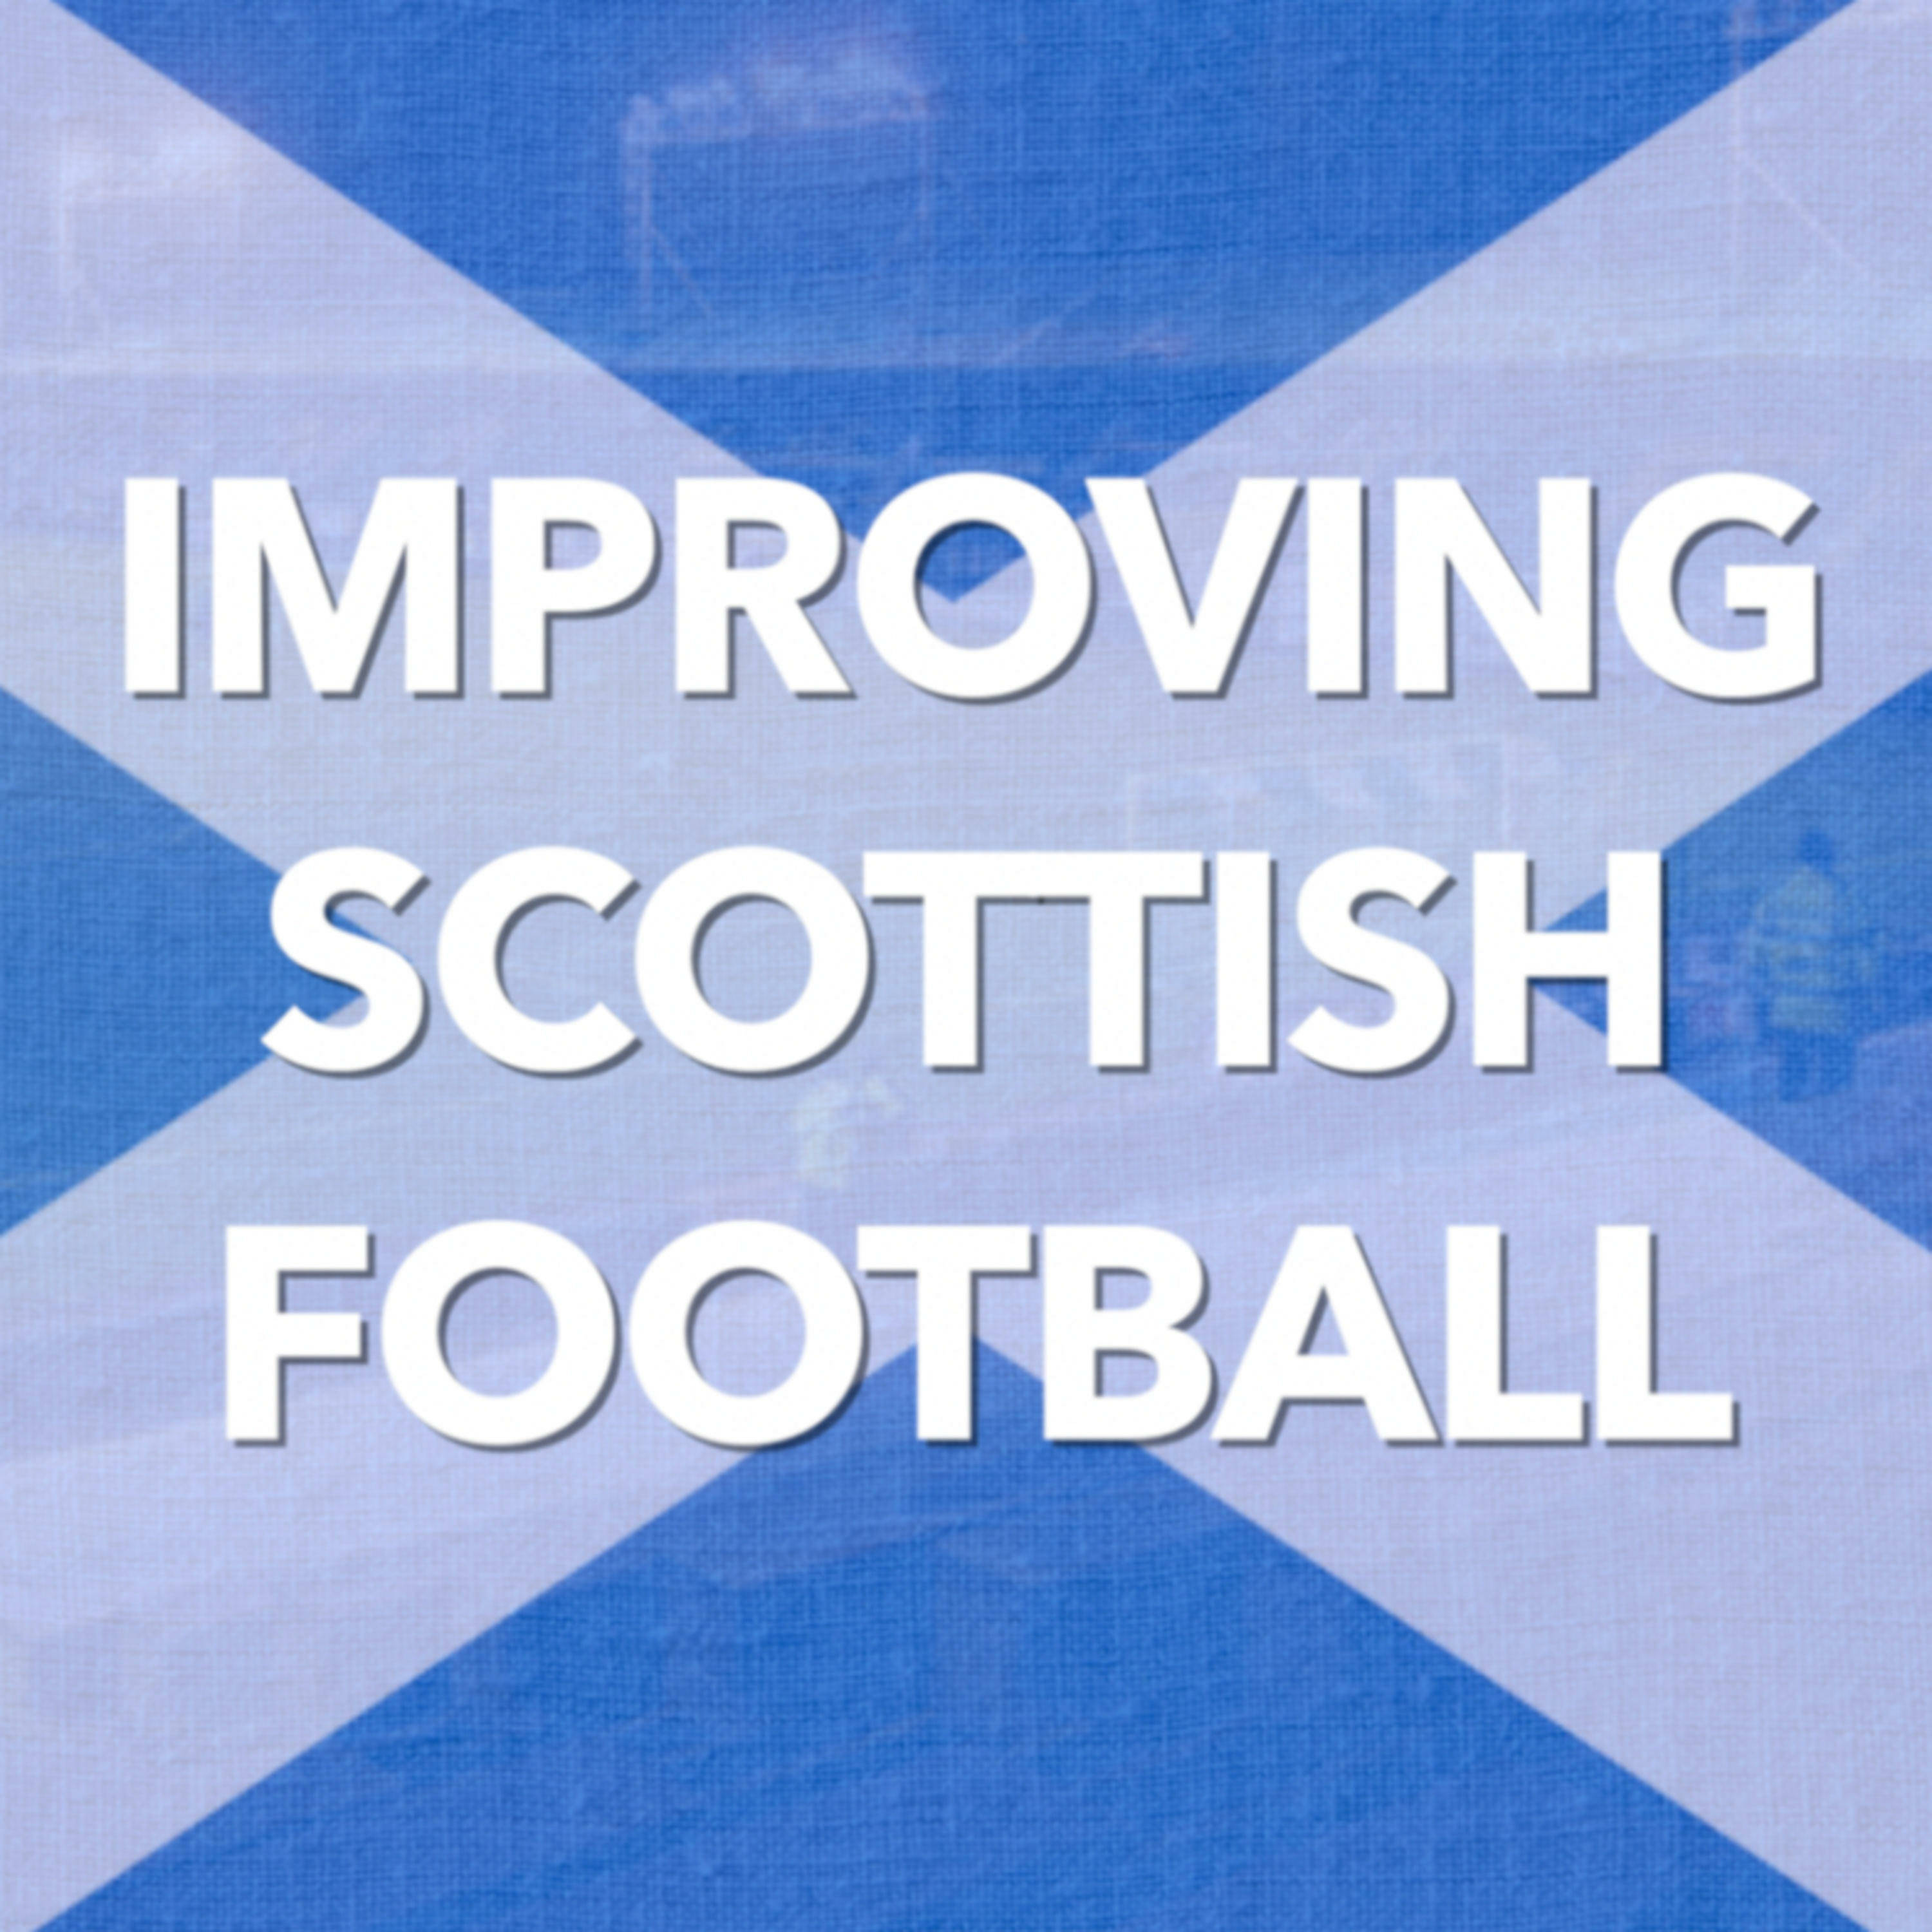 Is it time for Scottish football to reinvent itself?